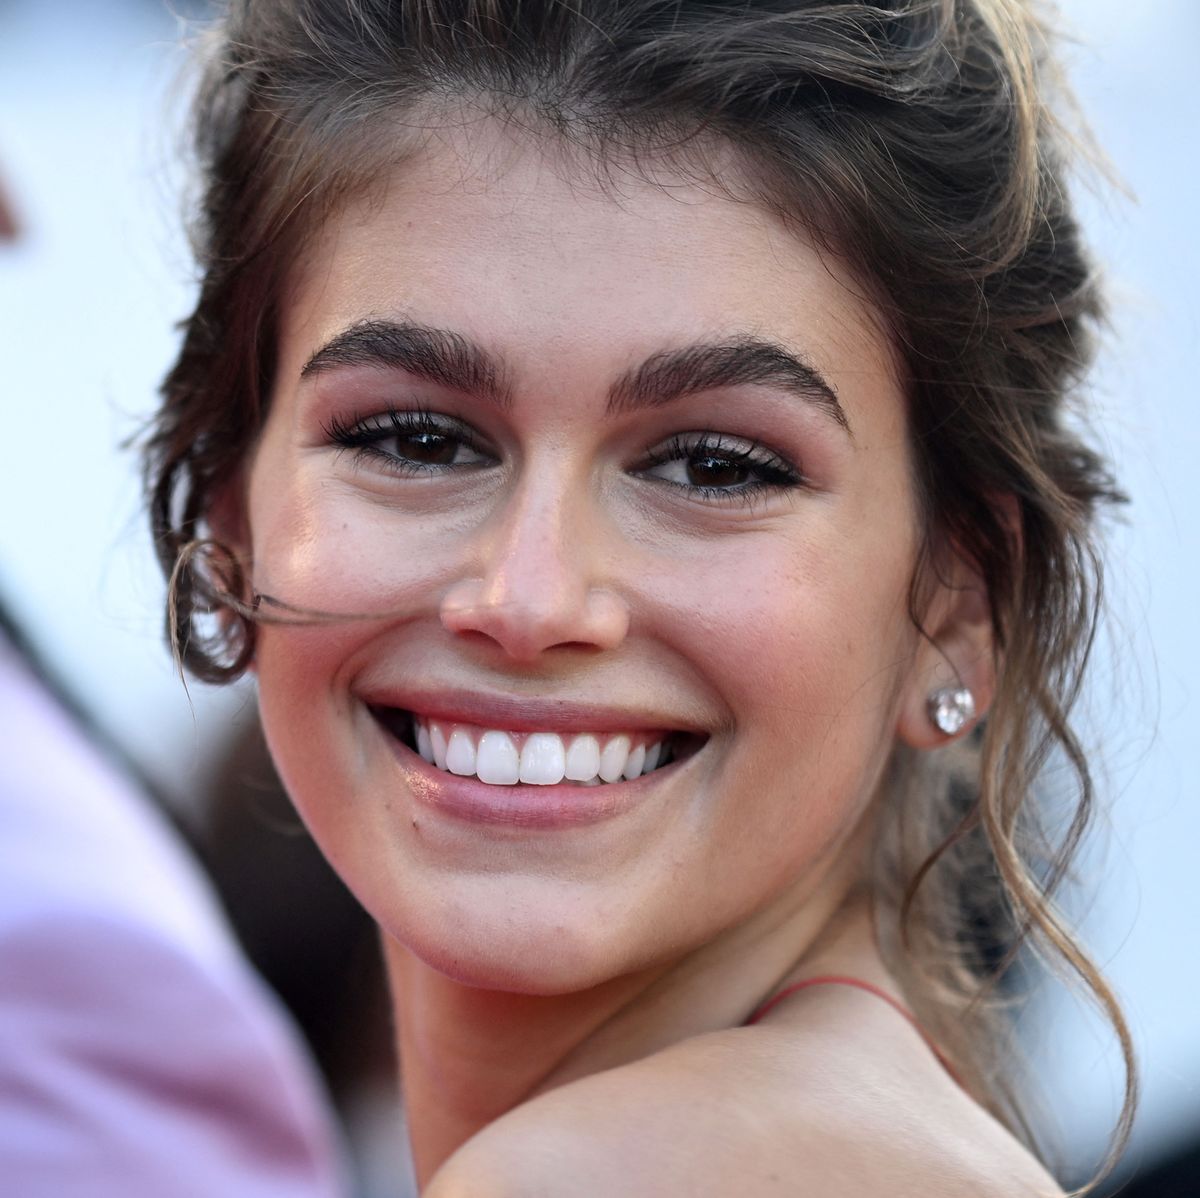 18 of Kaia Gerber's best hair and makeup moments